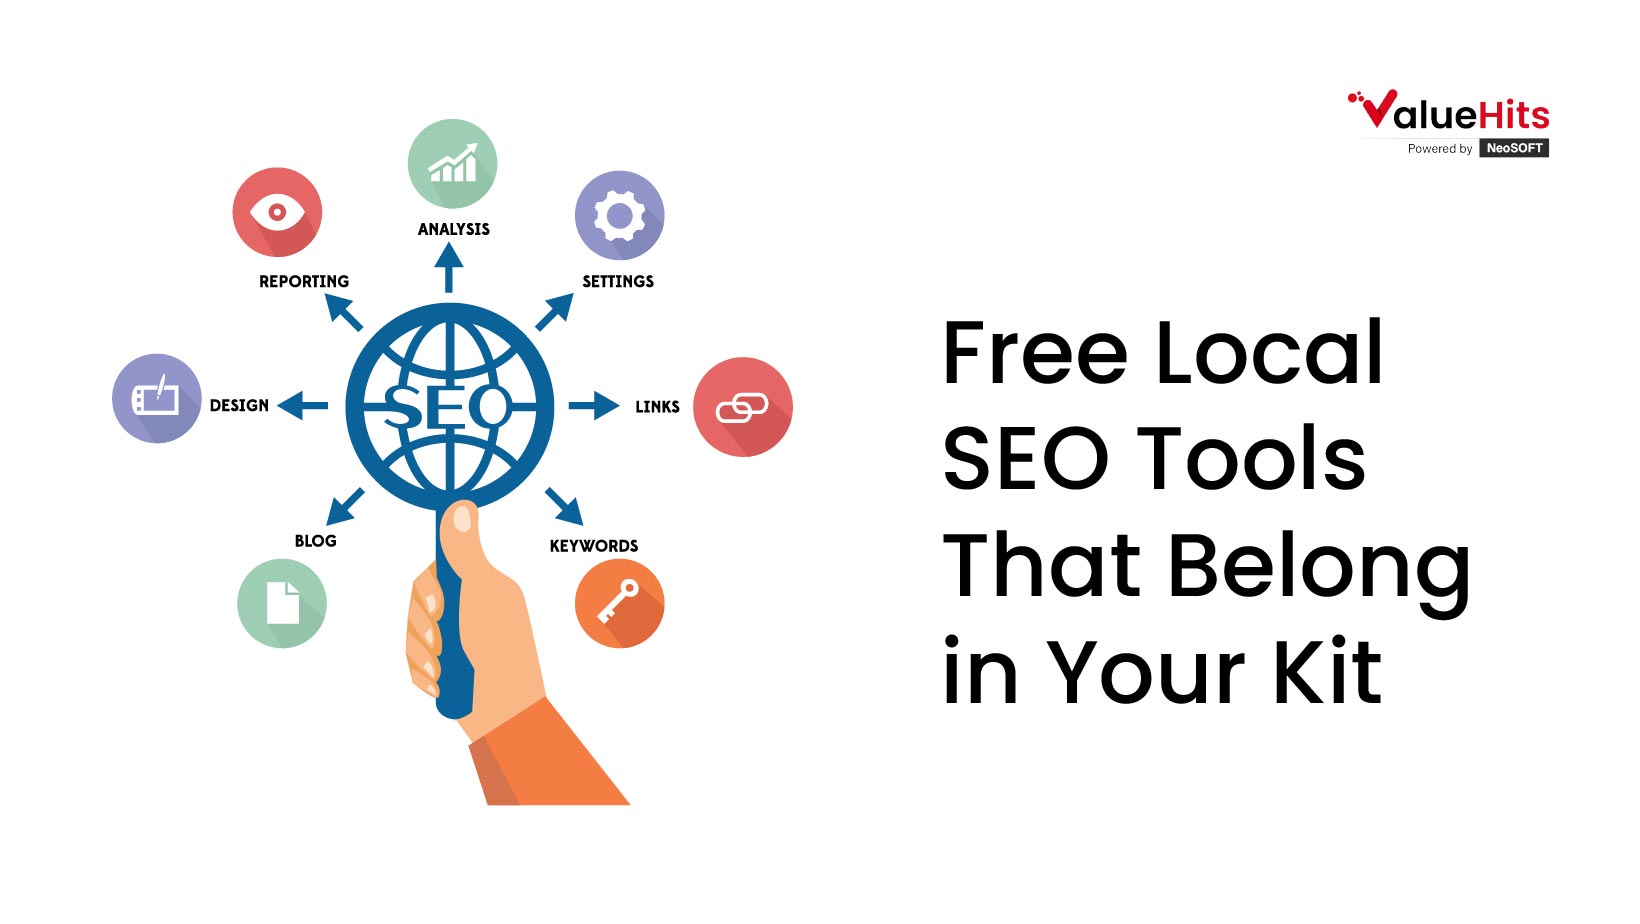 Free Local SEO Tools That Belong in Your Kit